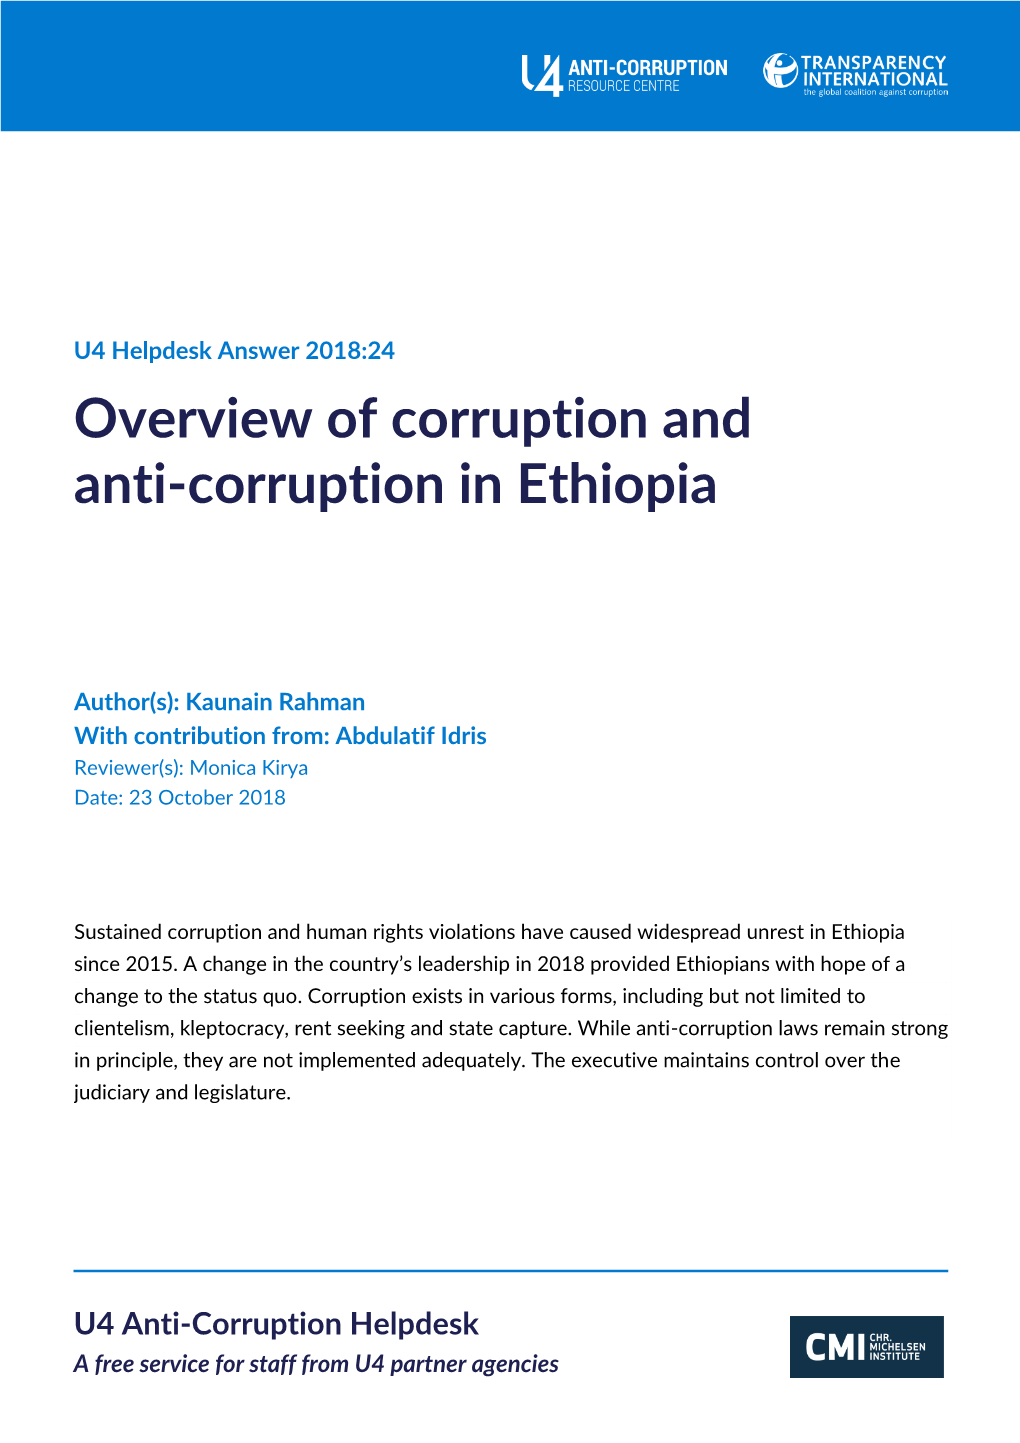 Overview of Corruption and Anti-Corruption in Ethiopia